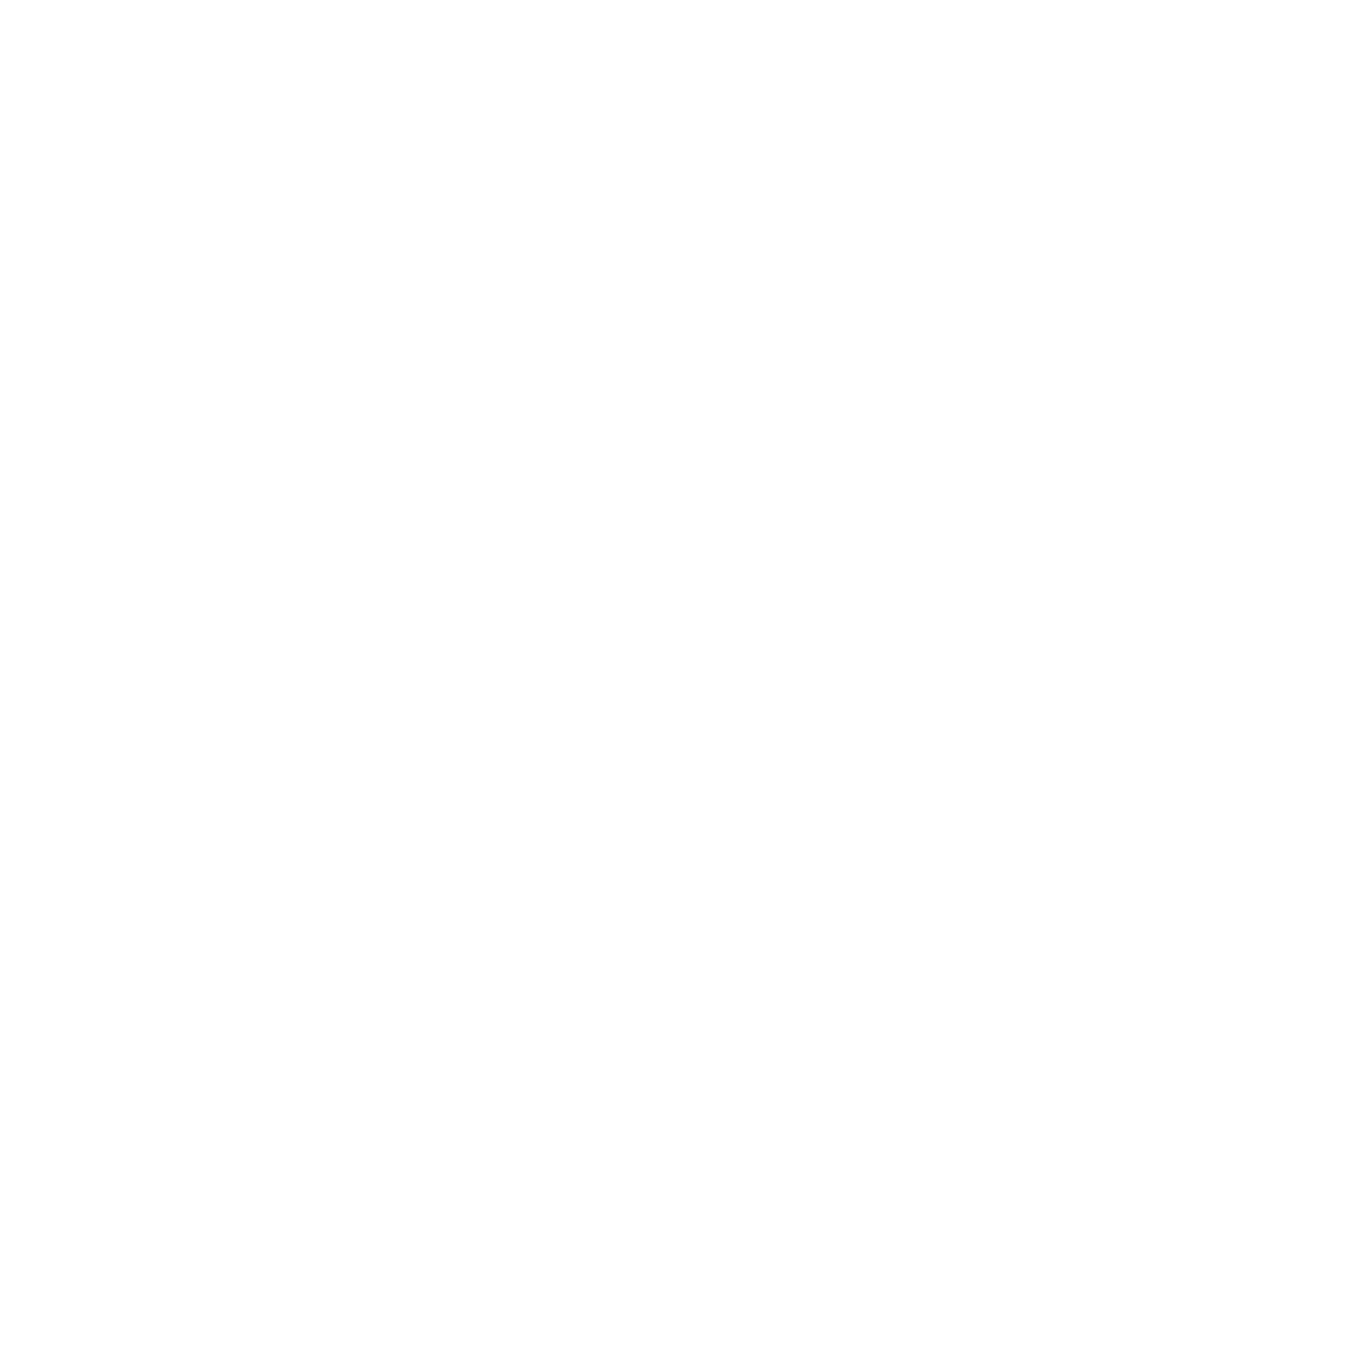 Badge with OCAS logo and various services listed